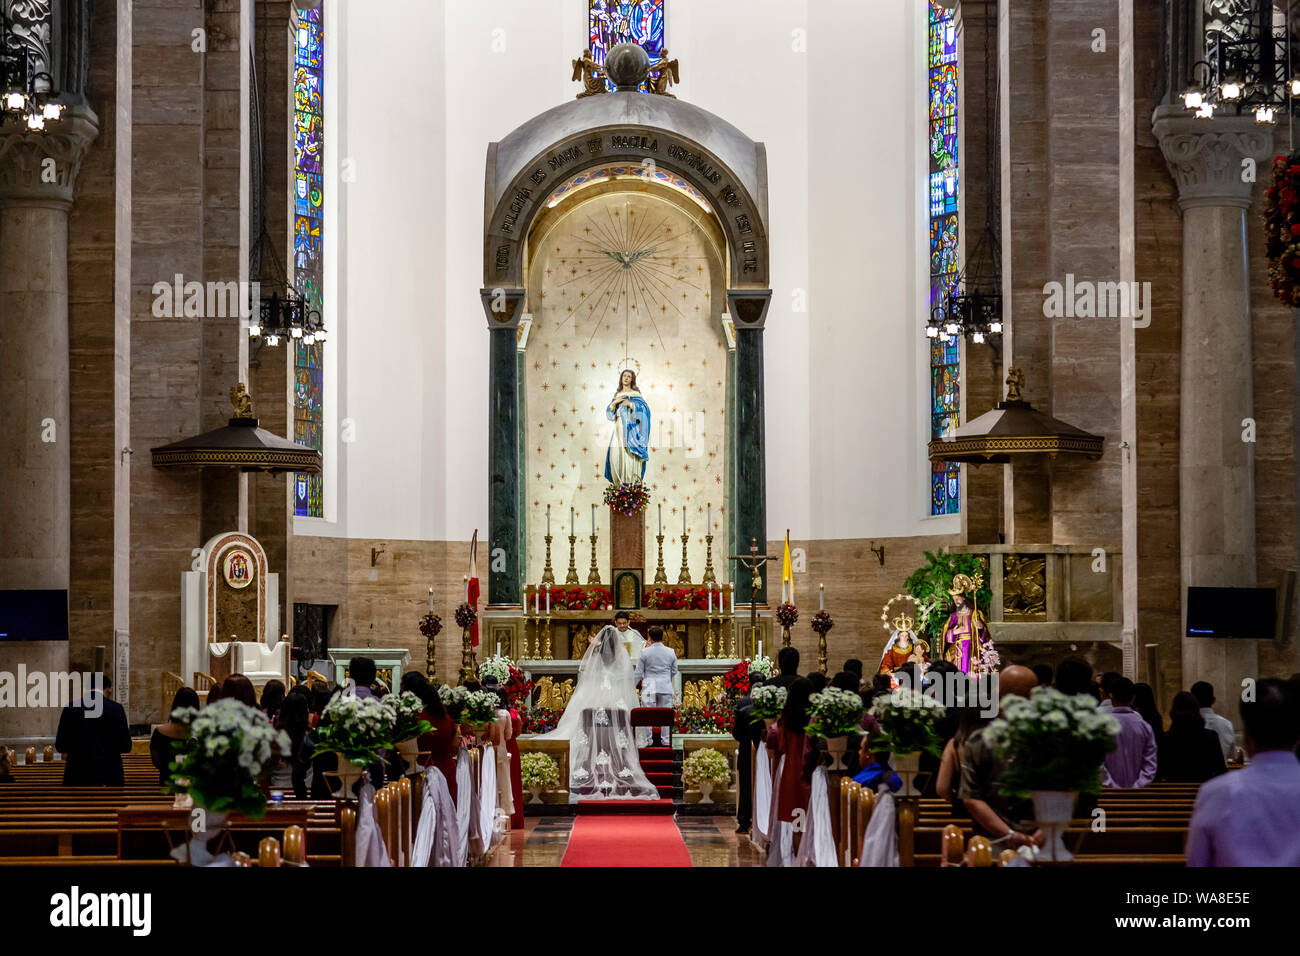 A Wedding Service Takes Place Inside The Cathedral In Intramuros, Manila, The Philippines Stock Photo